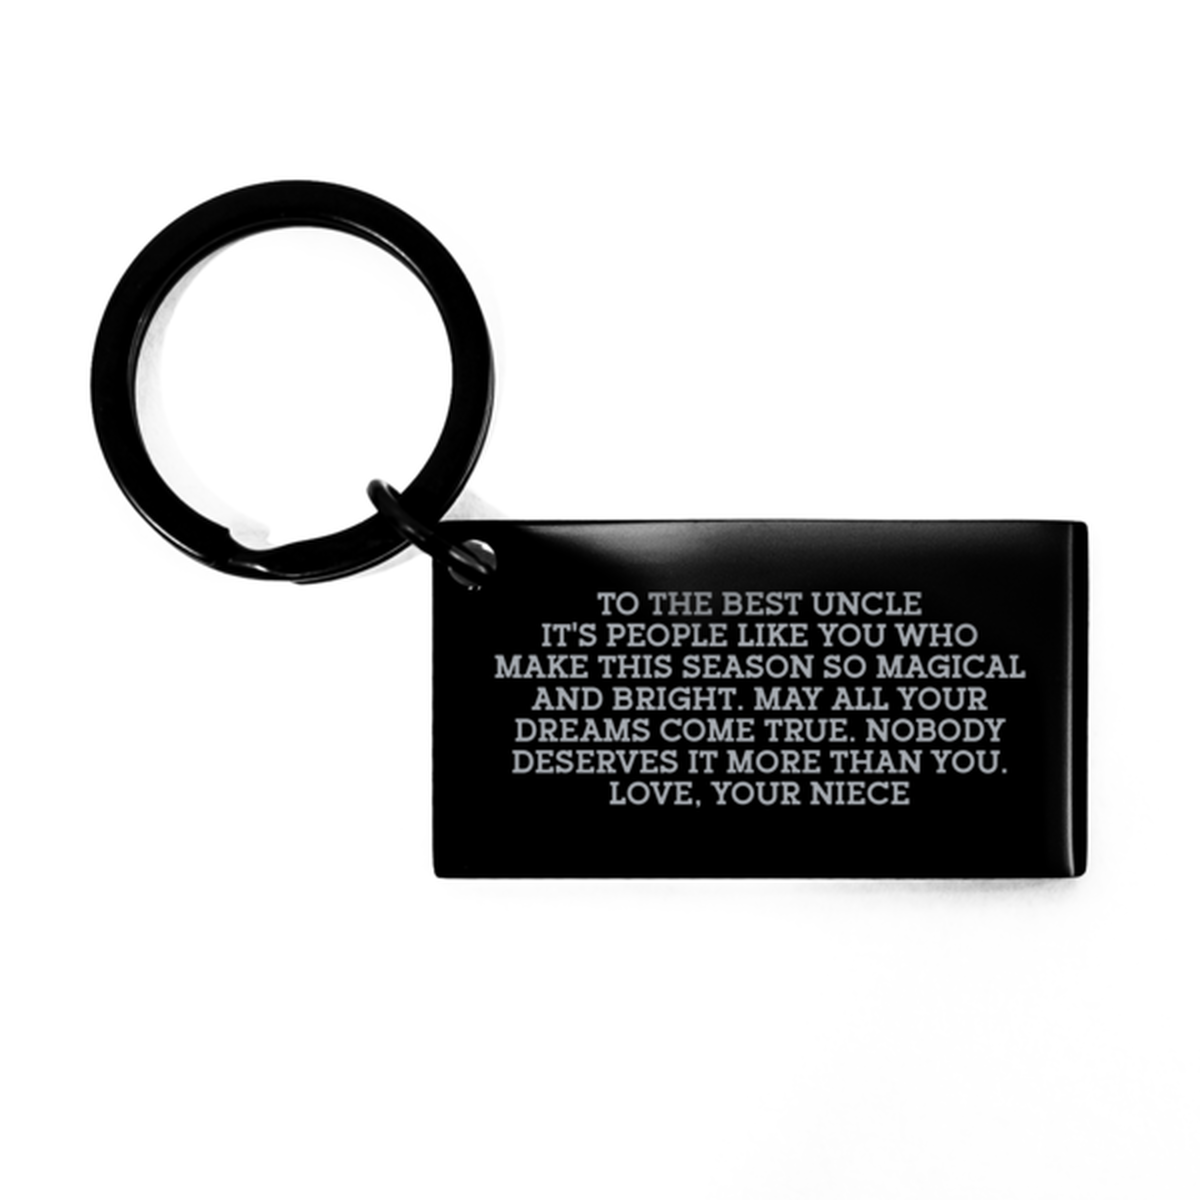 To My Uncle Black Keychain, May All Your Dreams Come True, Fathers Day Gifts For Uncle From Niece, Birthday Gifts For Men